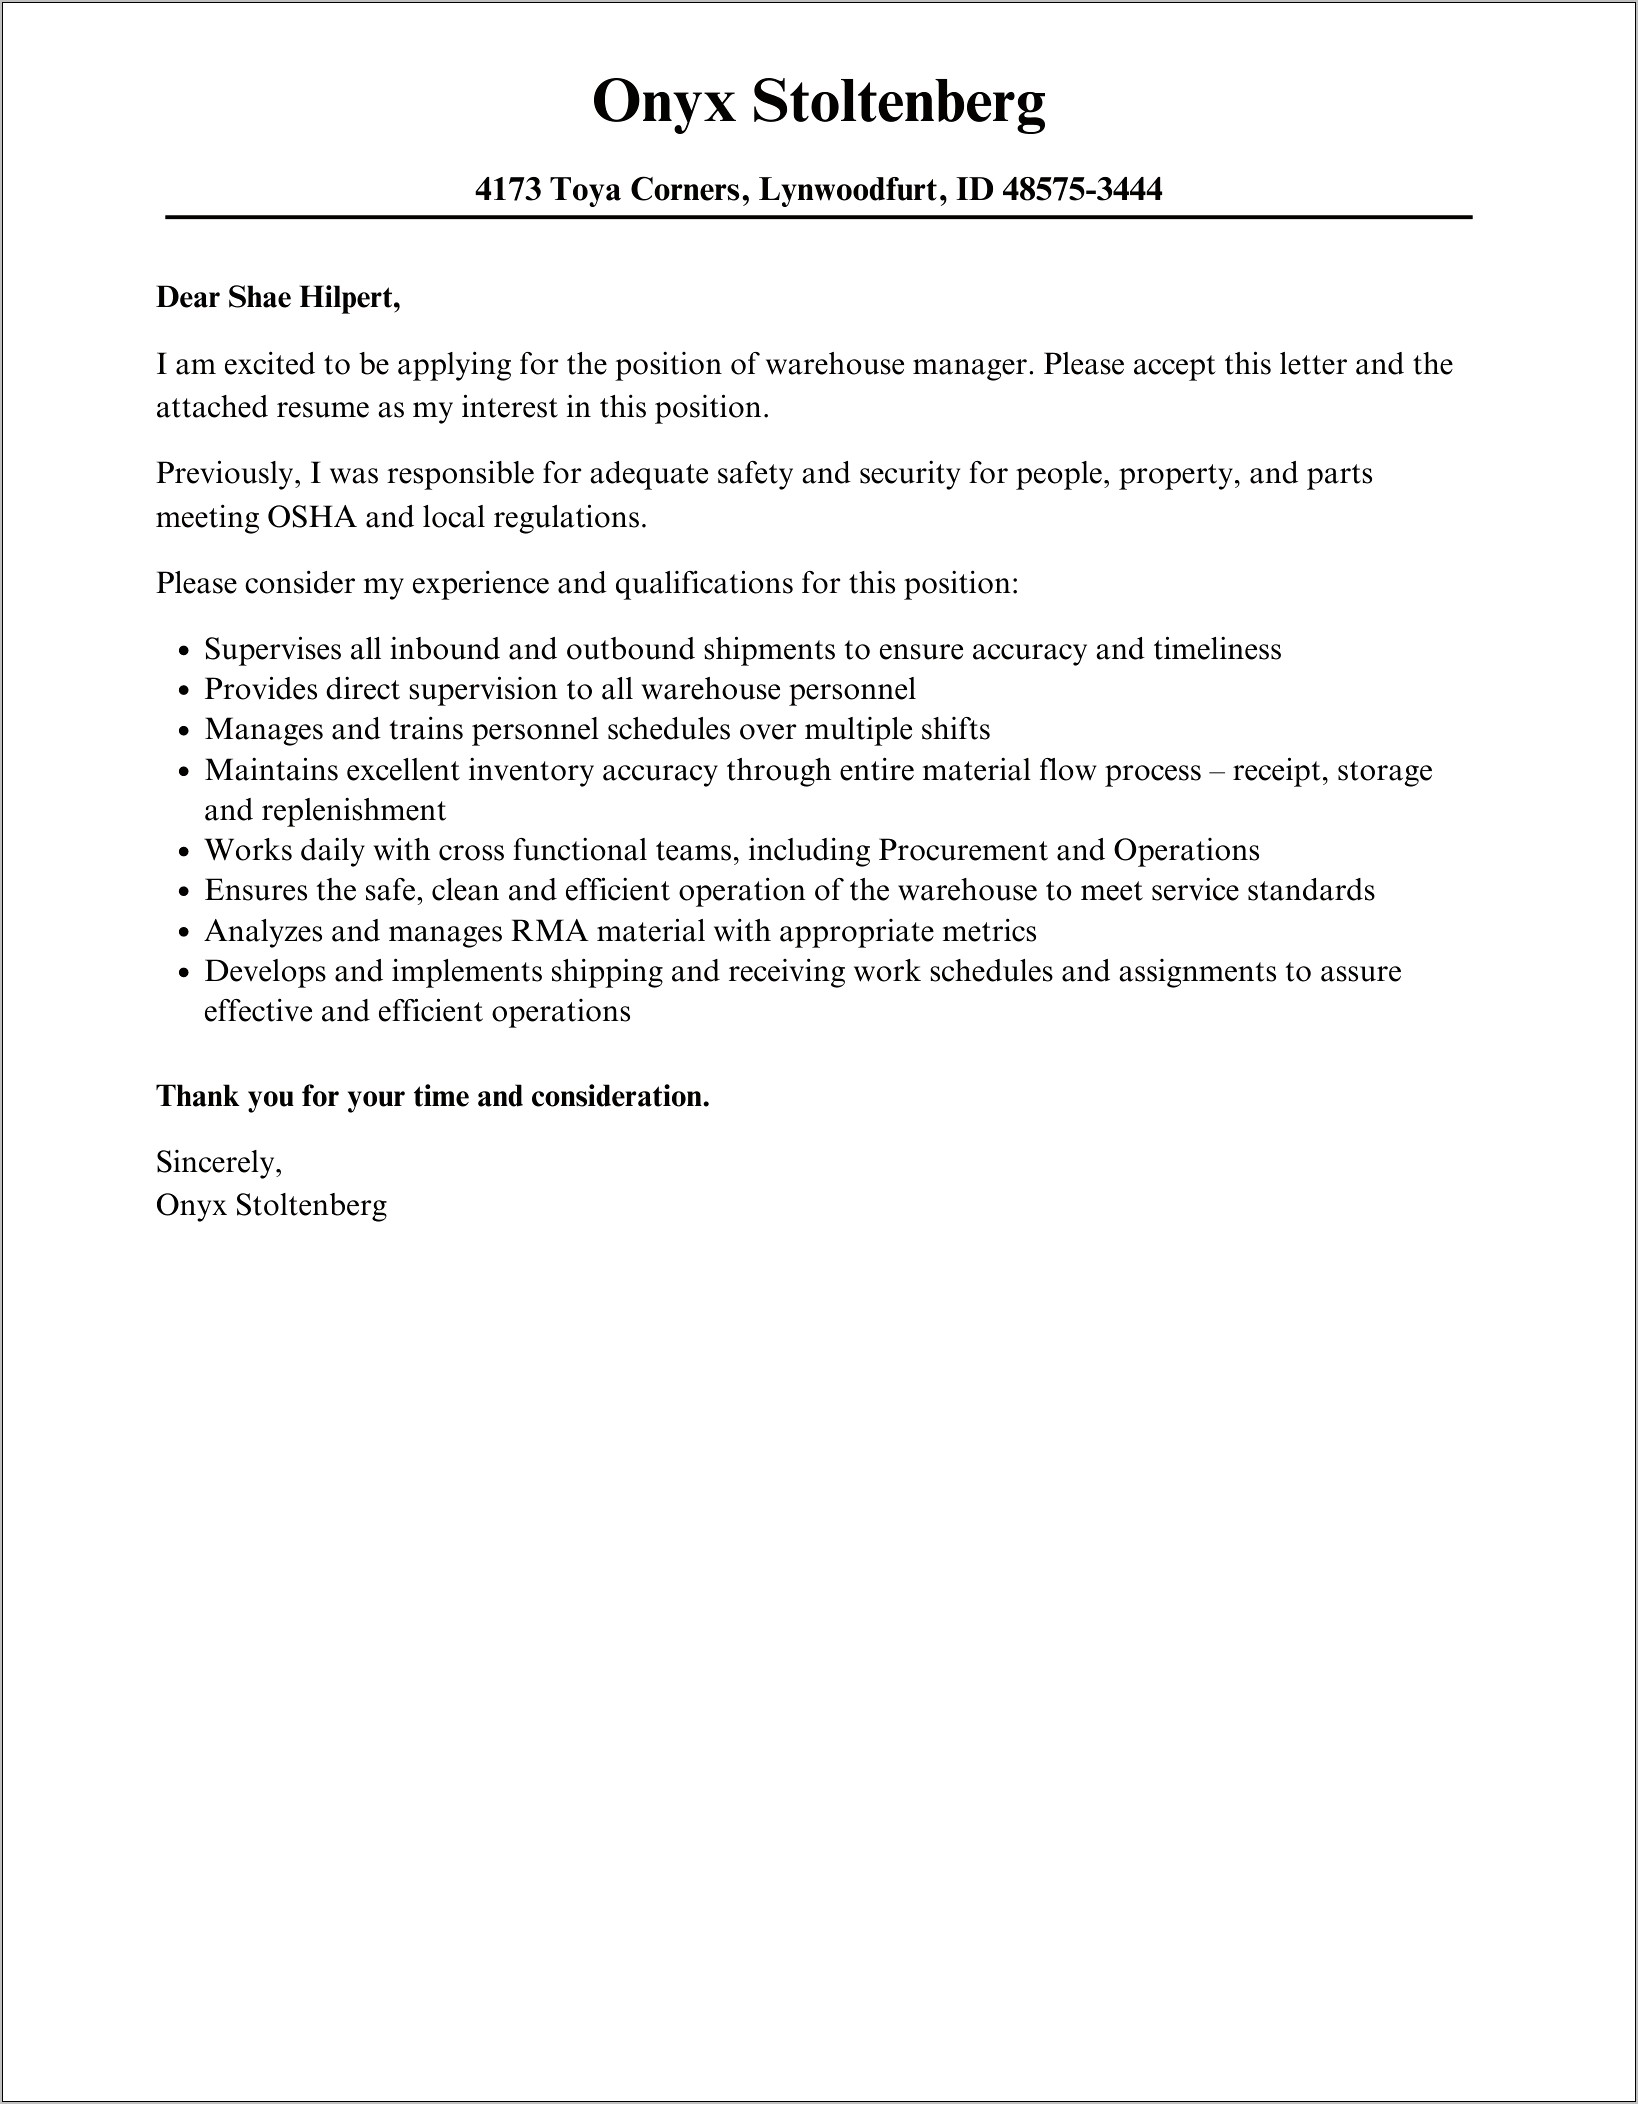 Resume Cover Letter Warehouse Manager